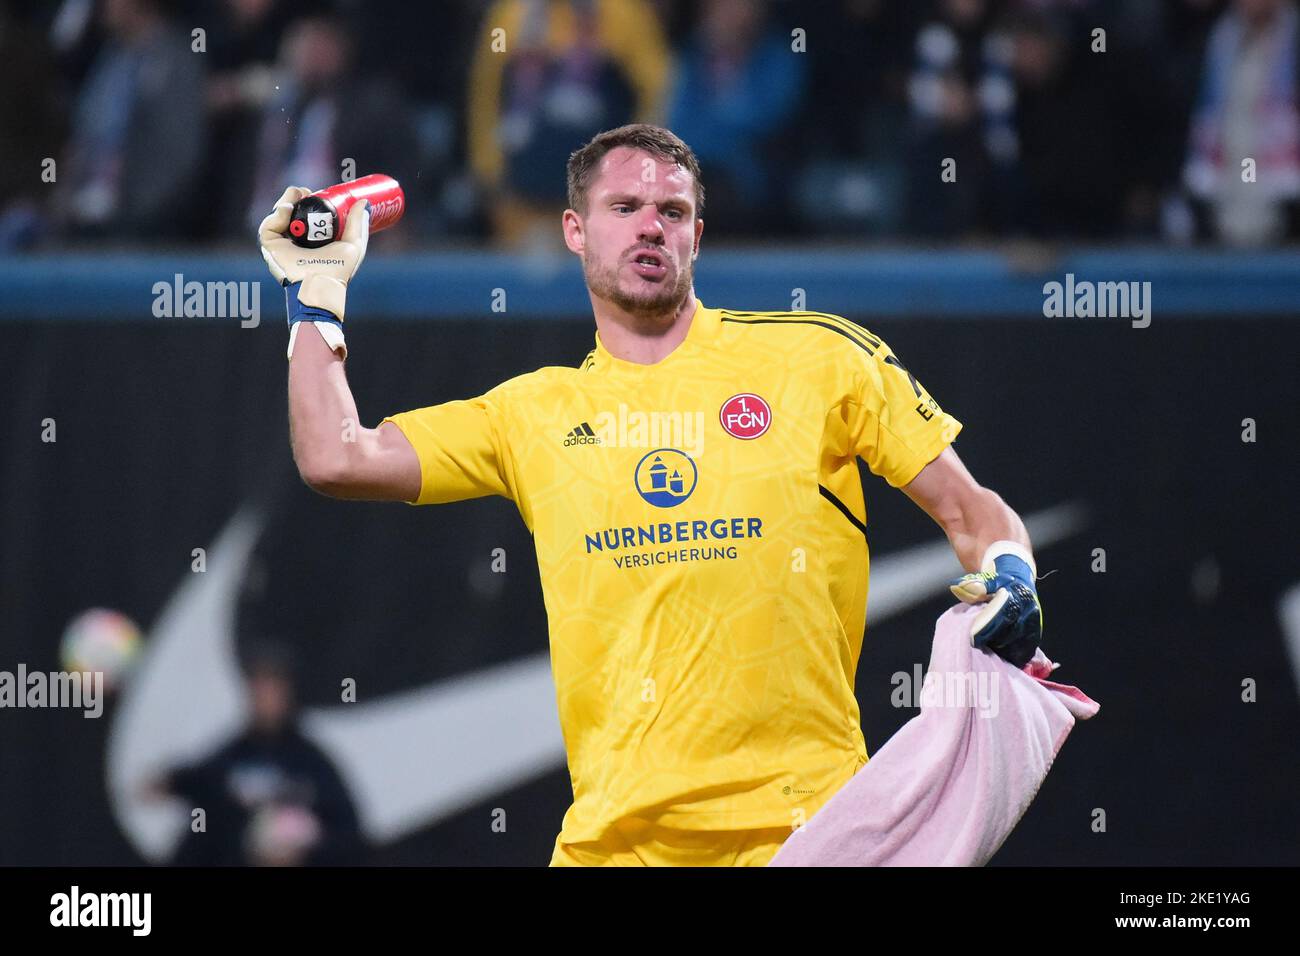 Rostock, Germany. 09th Nov, 2022. Soccer: 2nd Bundesliga, Hansa Rostock - 1. FC Nürnberg, Matchday 16, Ostseestadion. Nuremberg goalkeeper Christian Mathenia angrily throws away his water bottle after the game. Credit: Gregor Fischer/dpa - IMPORTANT NOTE: In accordance with the requirements of the DFL Deutsche Fußball Liga and the DFB Deutscher Fußball-Bund, it is prohibited to use or have used photographs taken in the stadium and/or of the match in the form of sequence pictures and/or video-like photo series./dpa/Alamy Live News Stock Photo